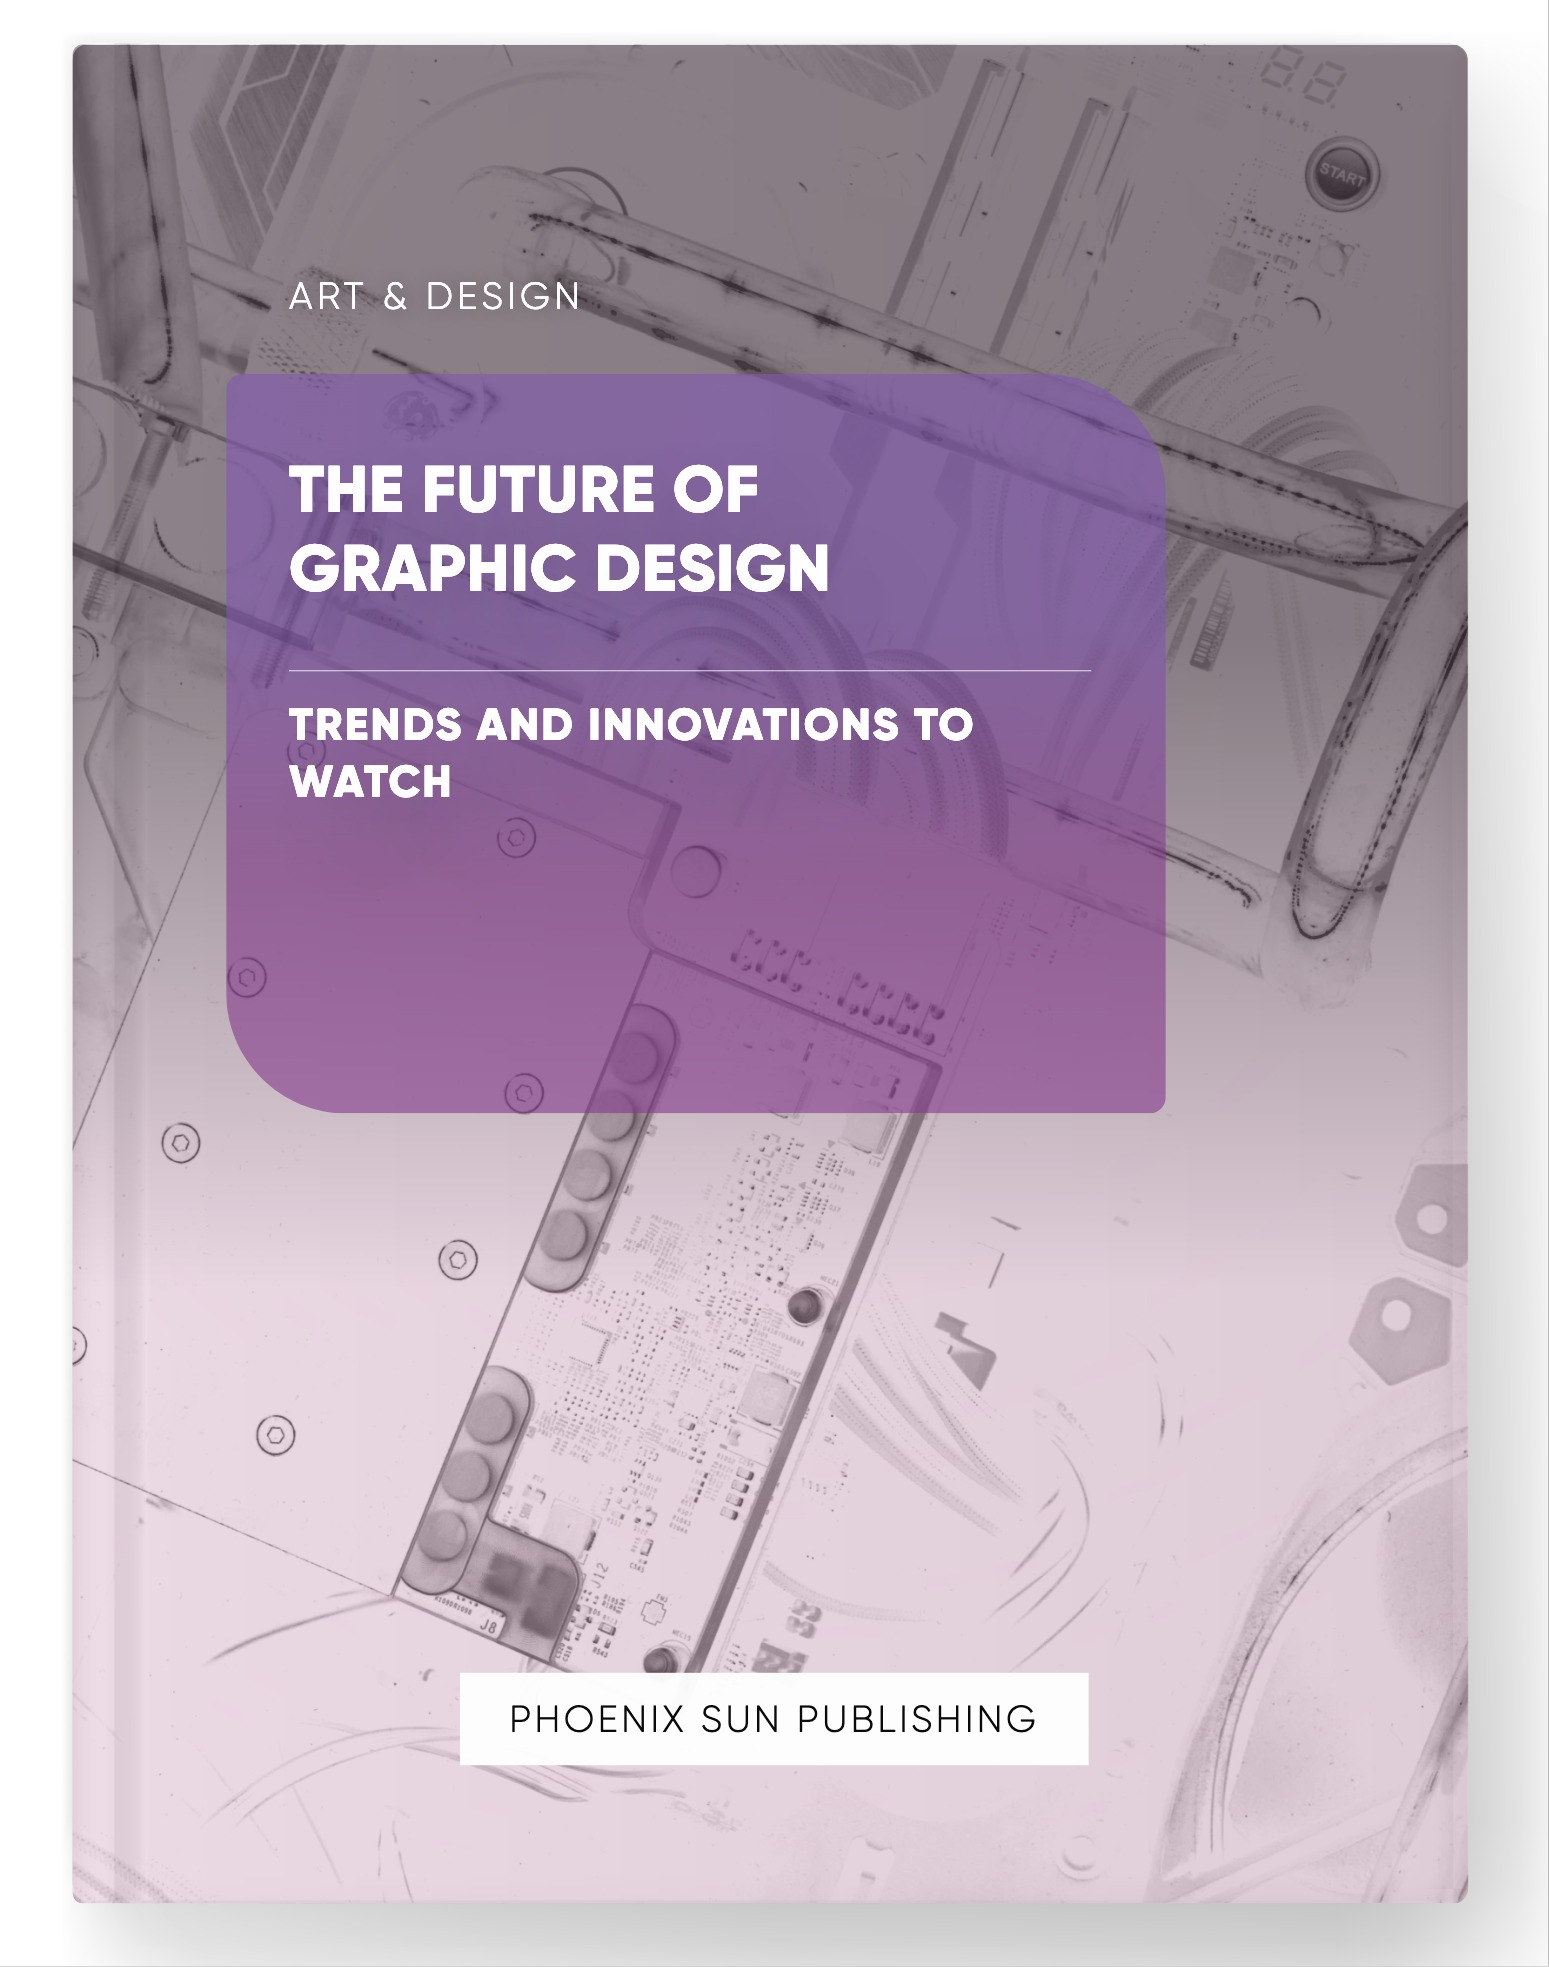 The Future of Graphic Design – Trends and Innovations to Watch